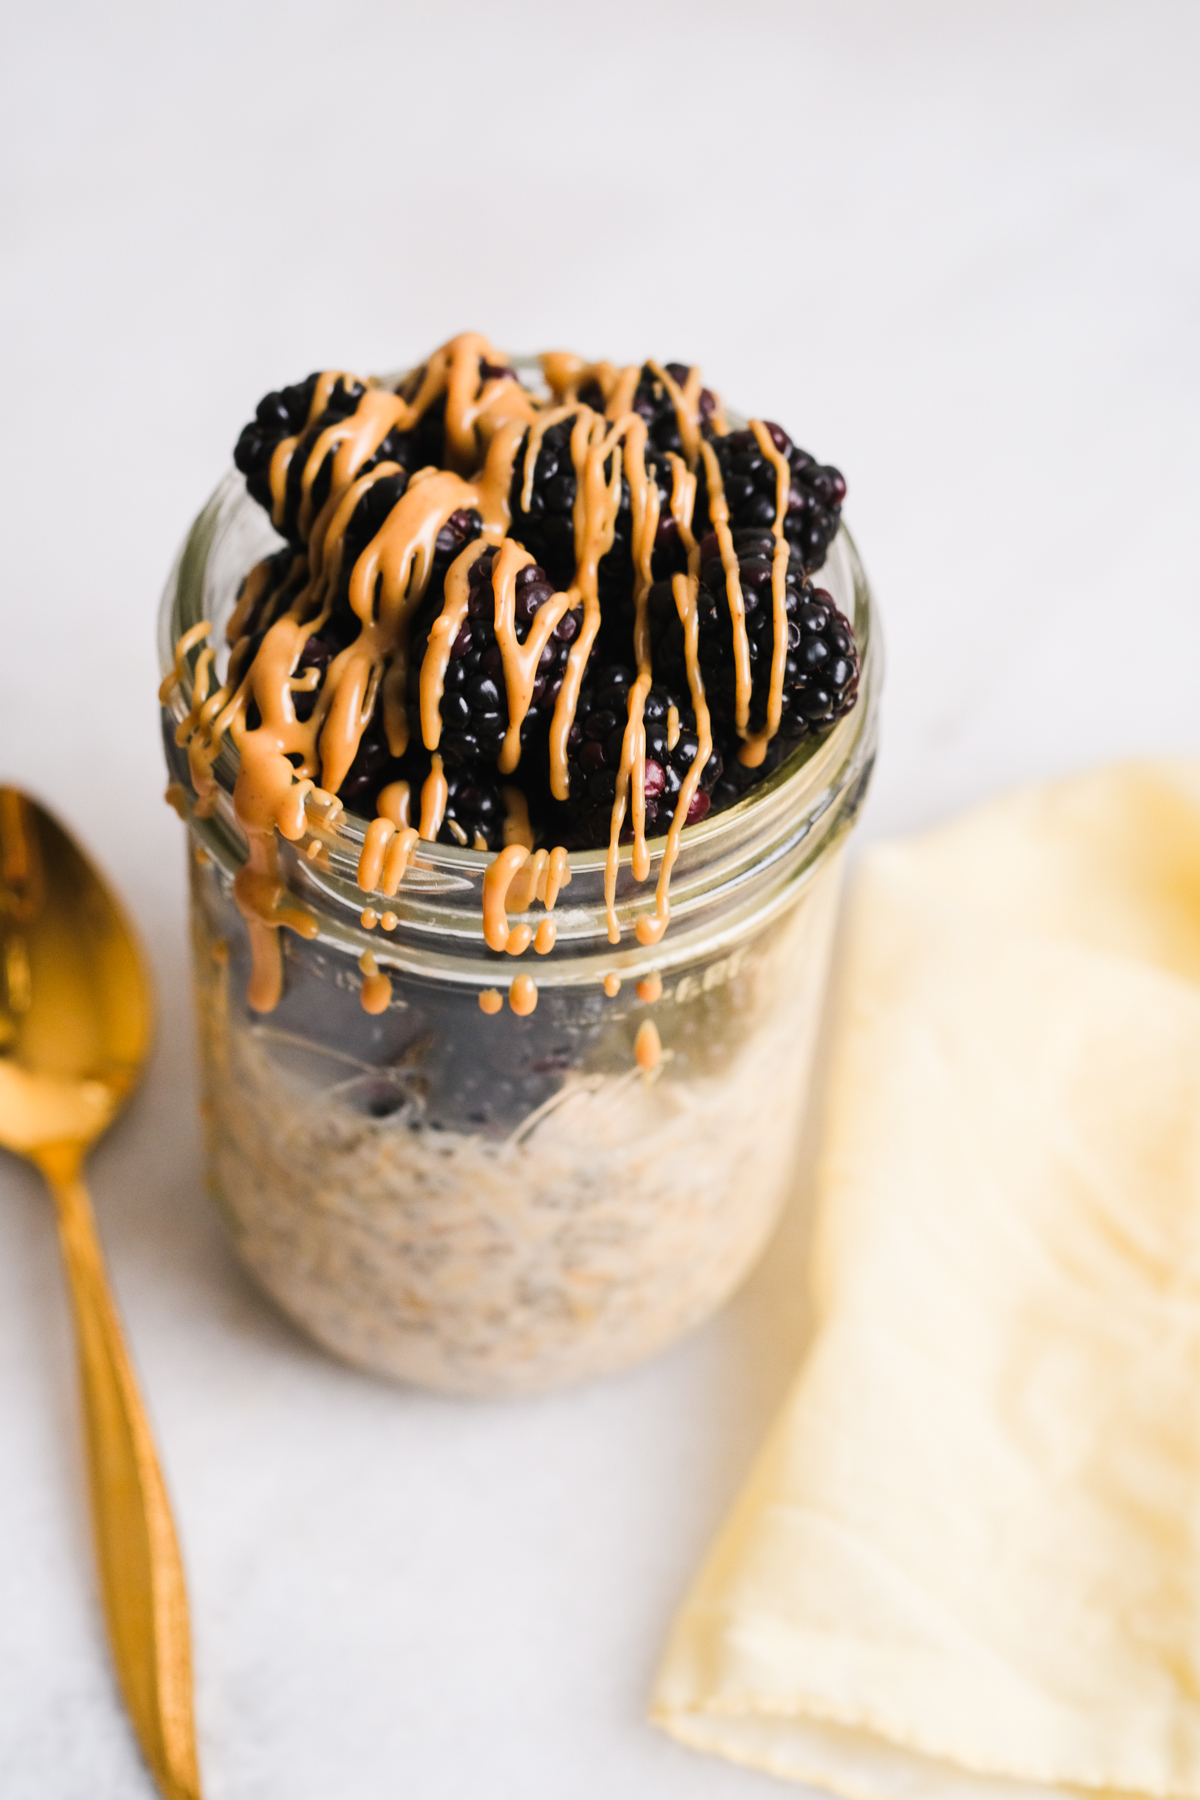 peanut butter overnight oats with blackberries and drizzled peanut butter